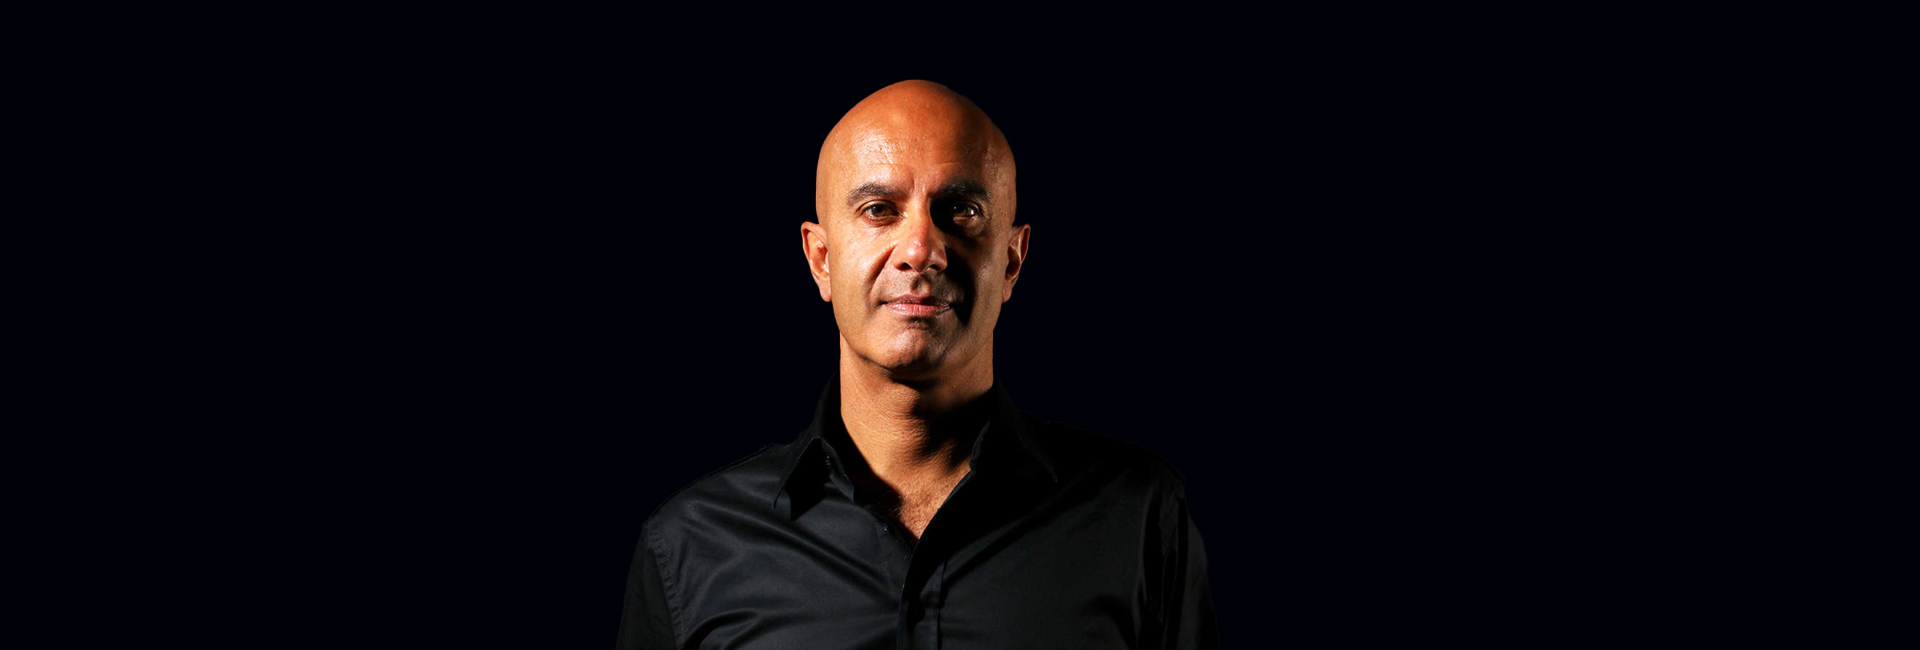 Watch Robin Sharma speak about how not to quit your dreams. He shares a series of values and thinking methods that the great ones use to stay strong when they meet their “doubt walls